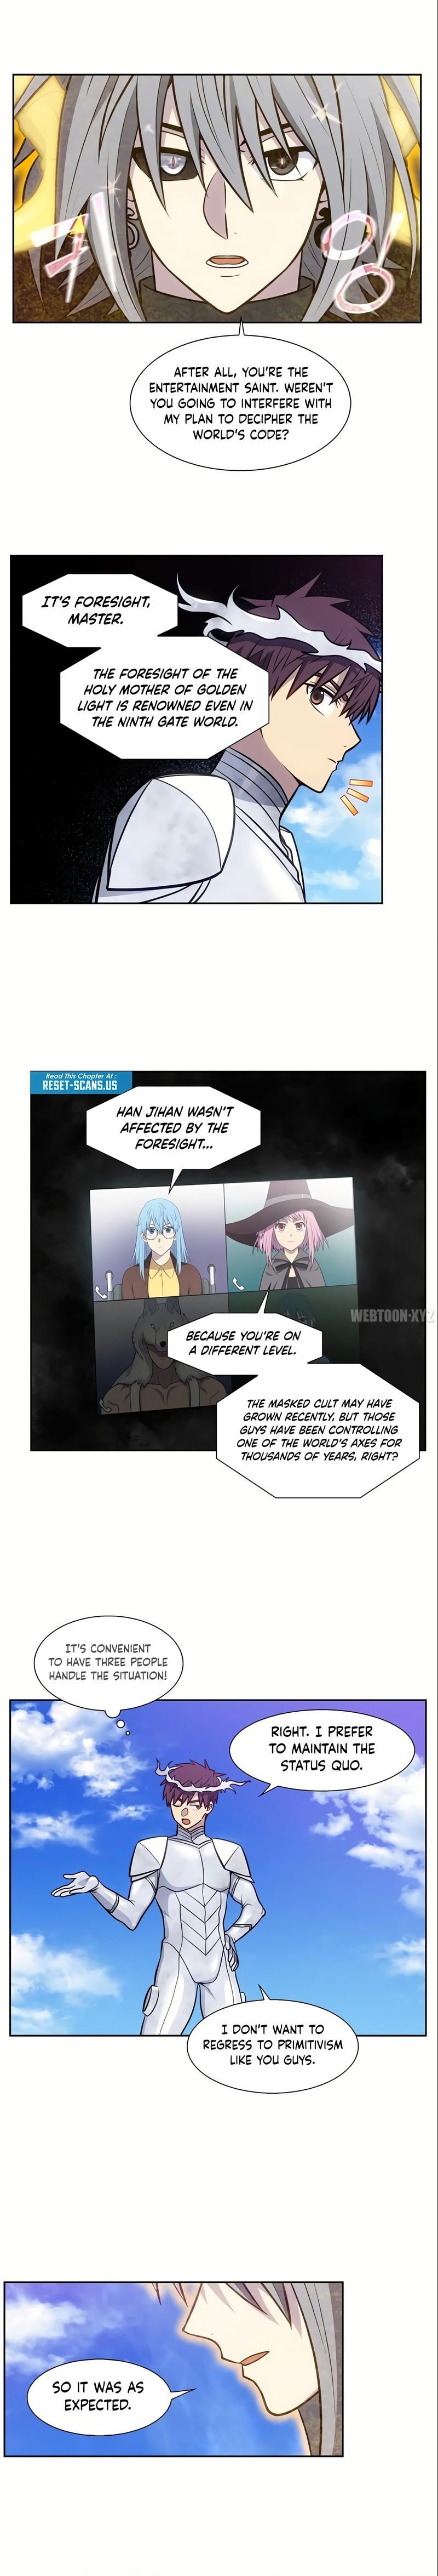 the-gamer-chap-490-9